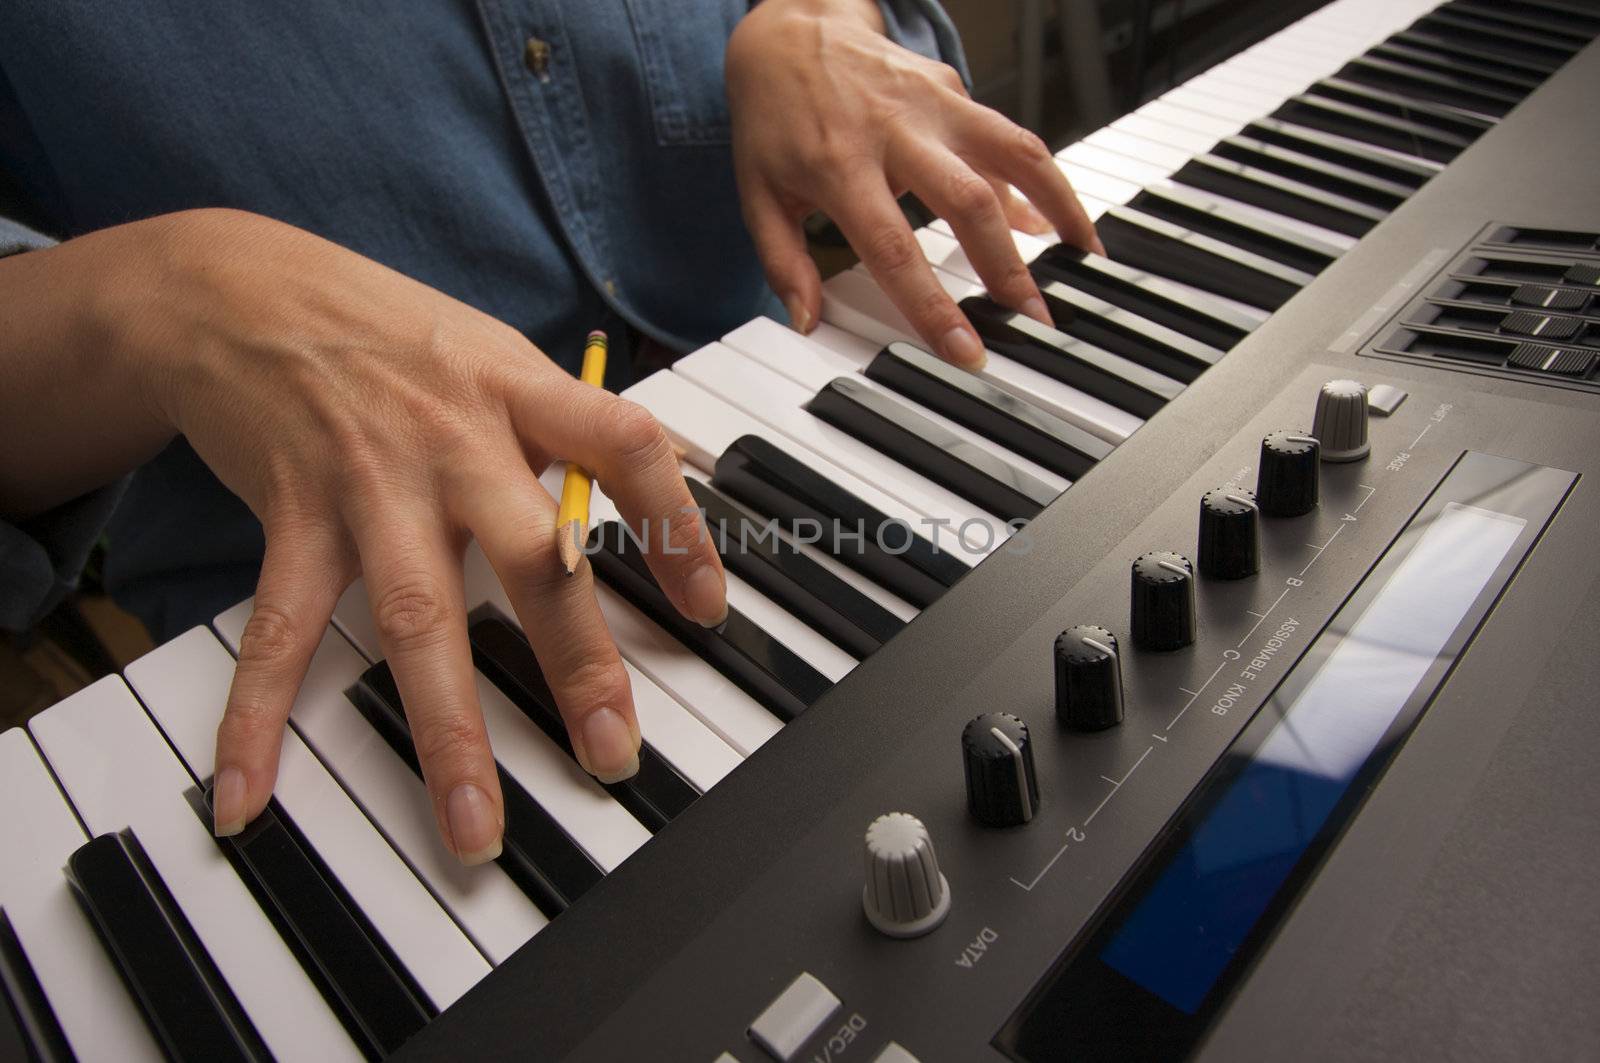 Woman's Fingers with Pencil on Digital Piano Keys